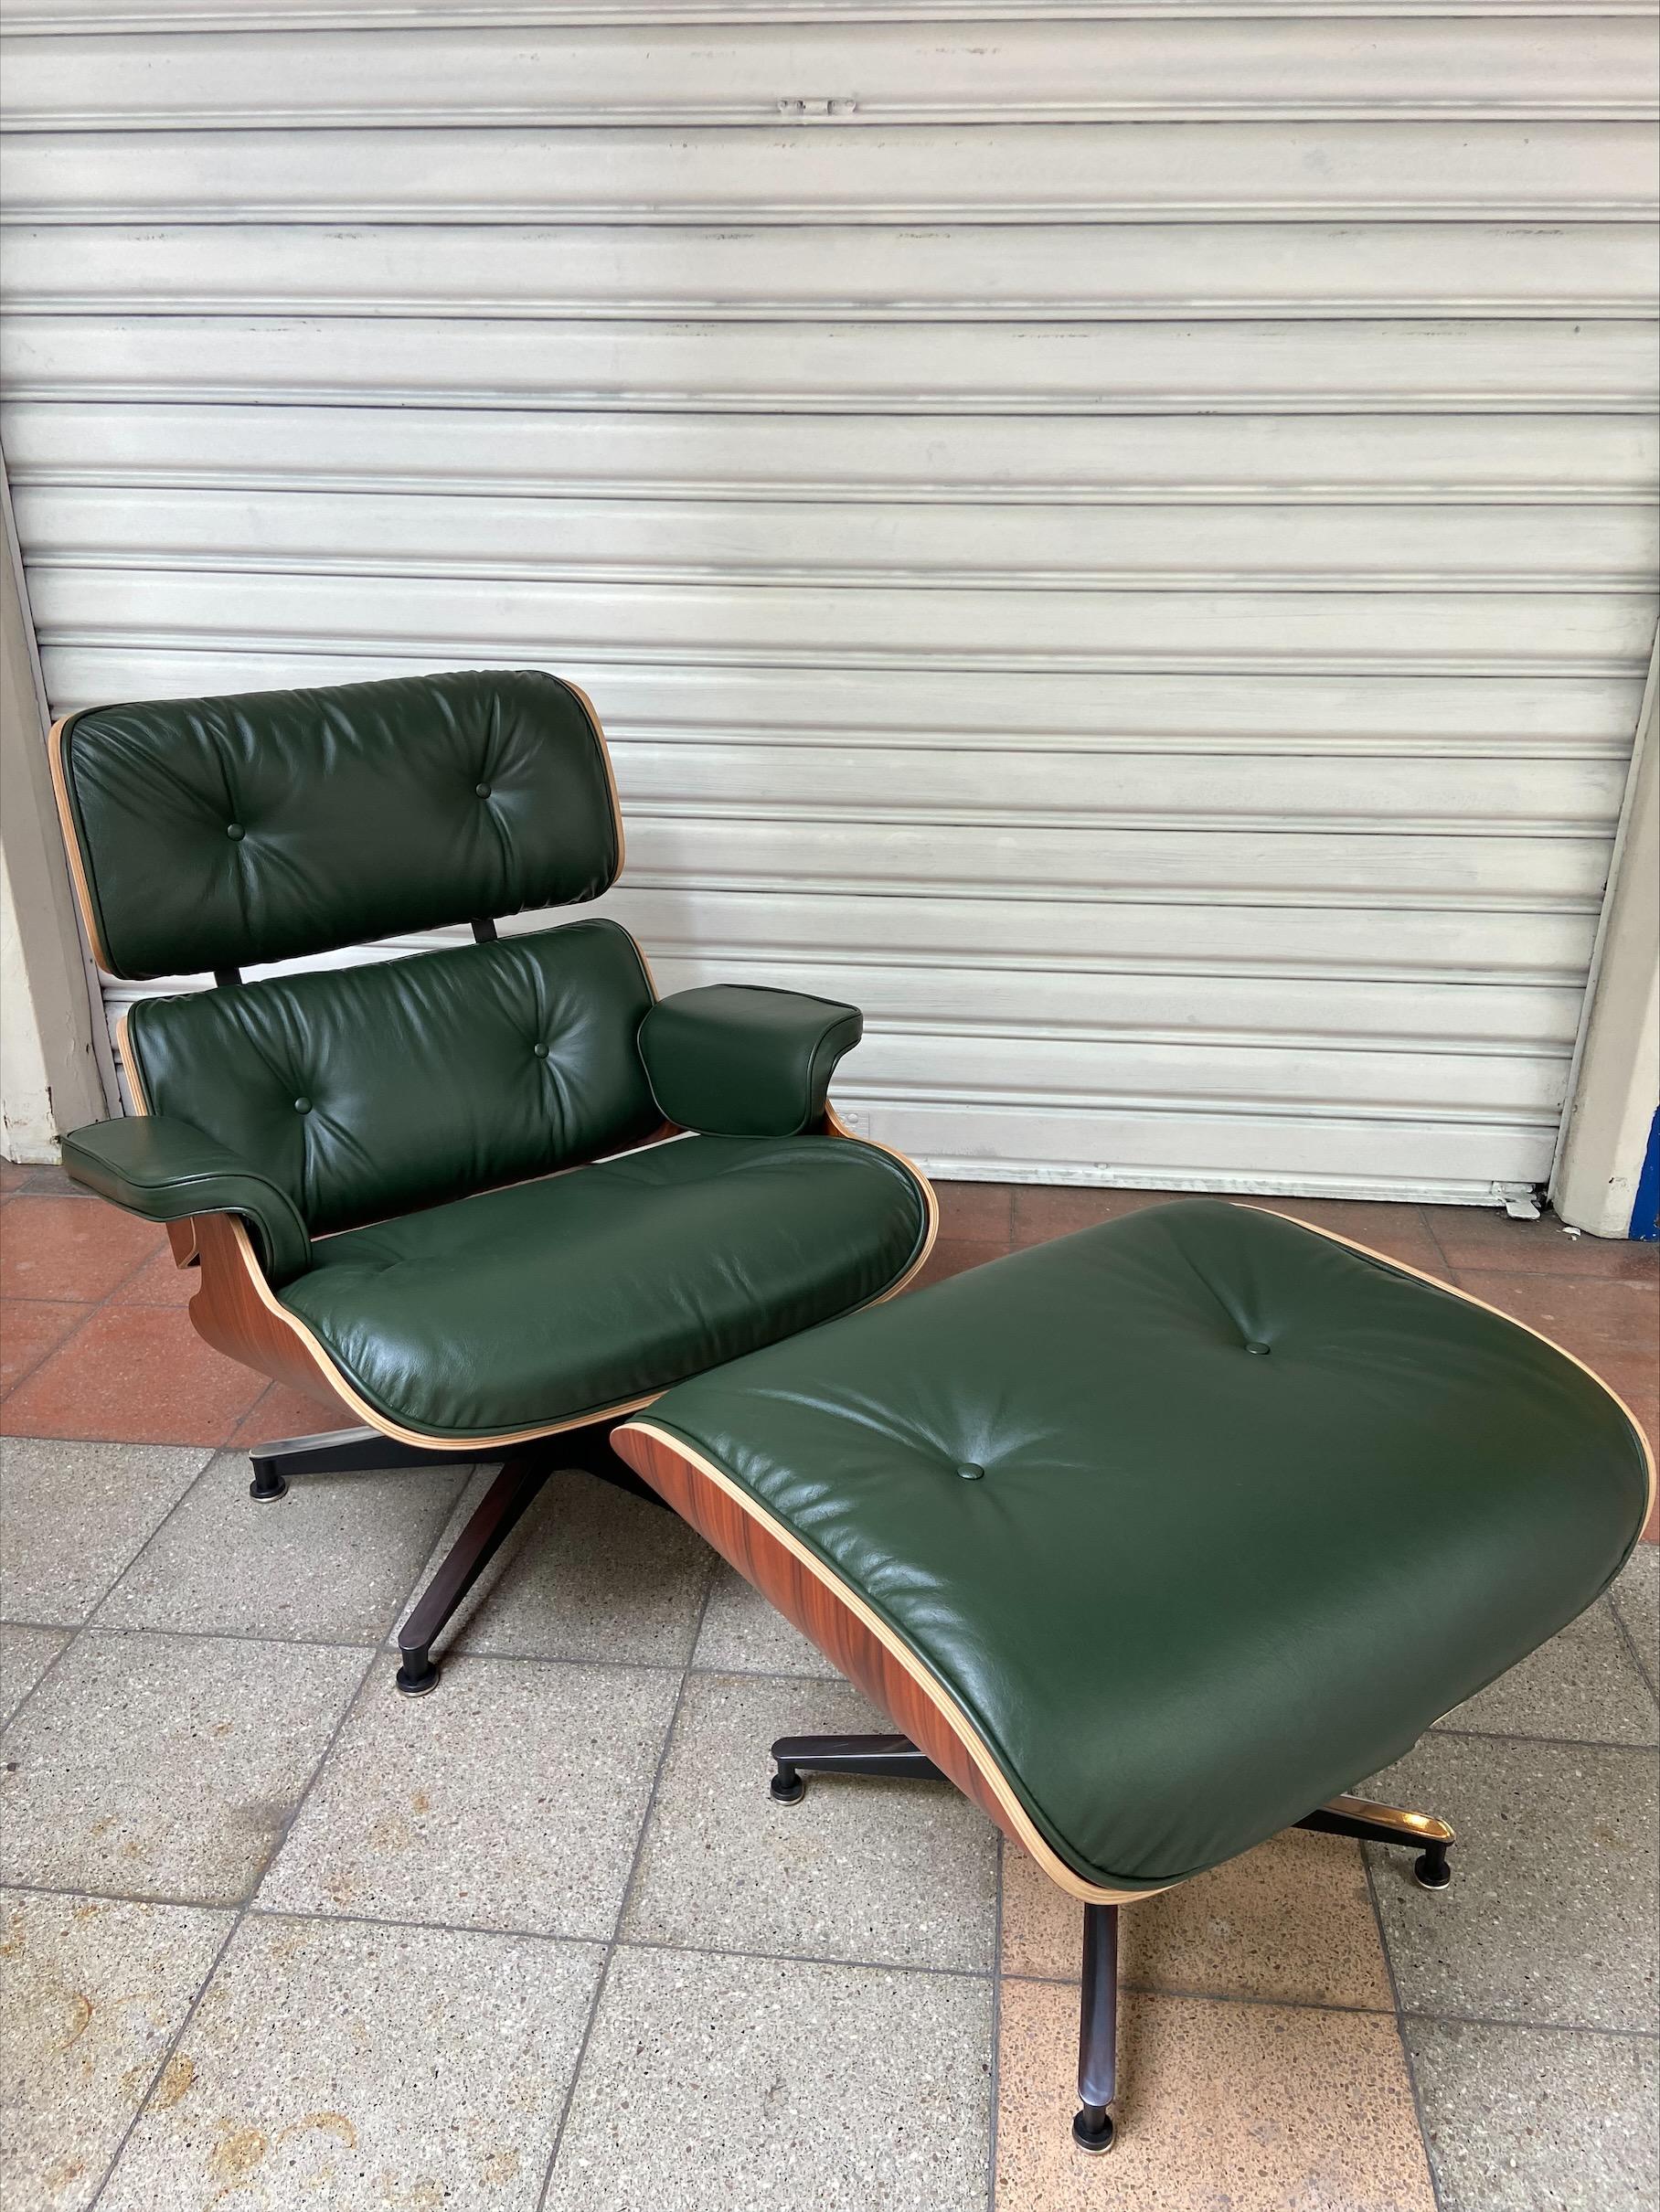 Charles EAMES Lounge chair and ottoman in green leather and rosewood
Publisher Herman Miller USA
2011
With his certificate
In a perfect state
Armchair size: height: 81.28 cm, wide: 83.185cm, length. 83.185cm
Ottoman size: height: 43.81 cm,